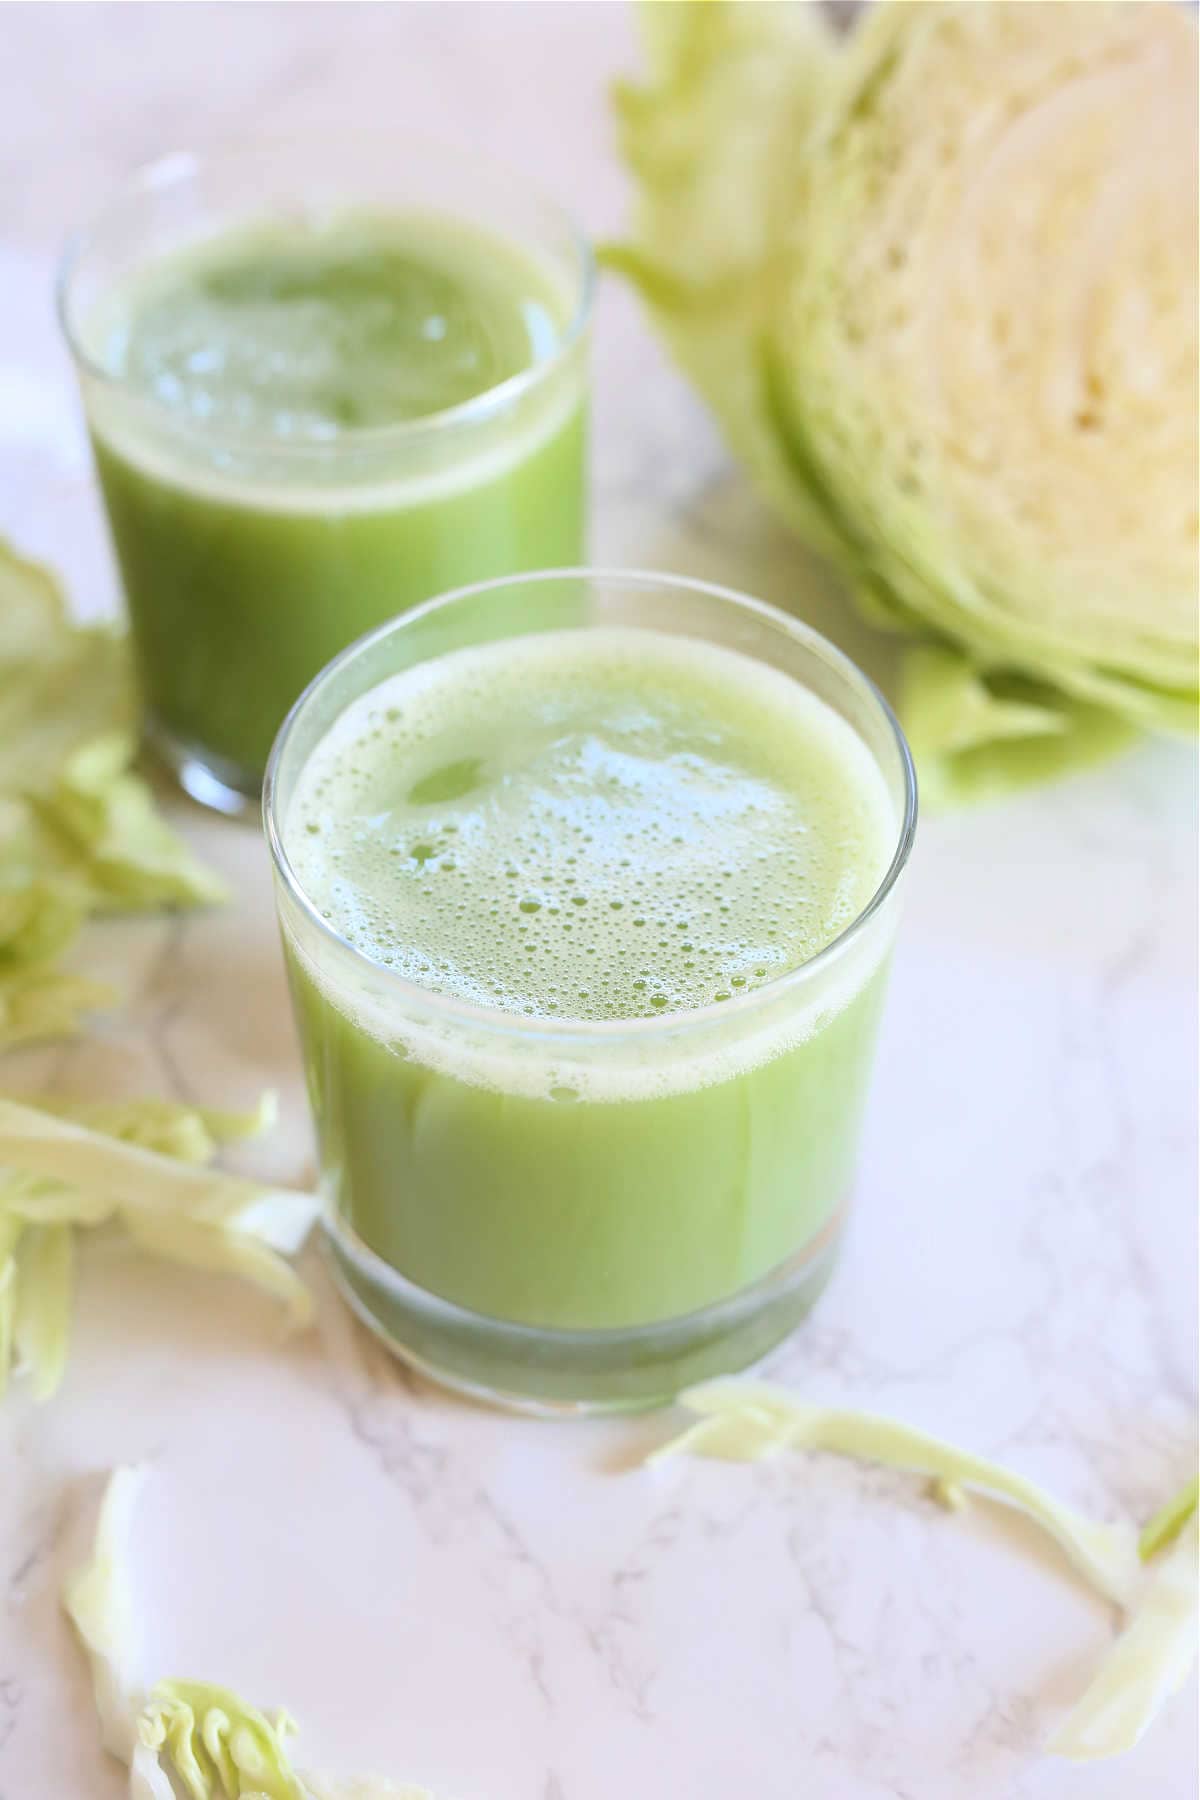 Cabbage juice recipe in a glass with raw cabbage leaves.